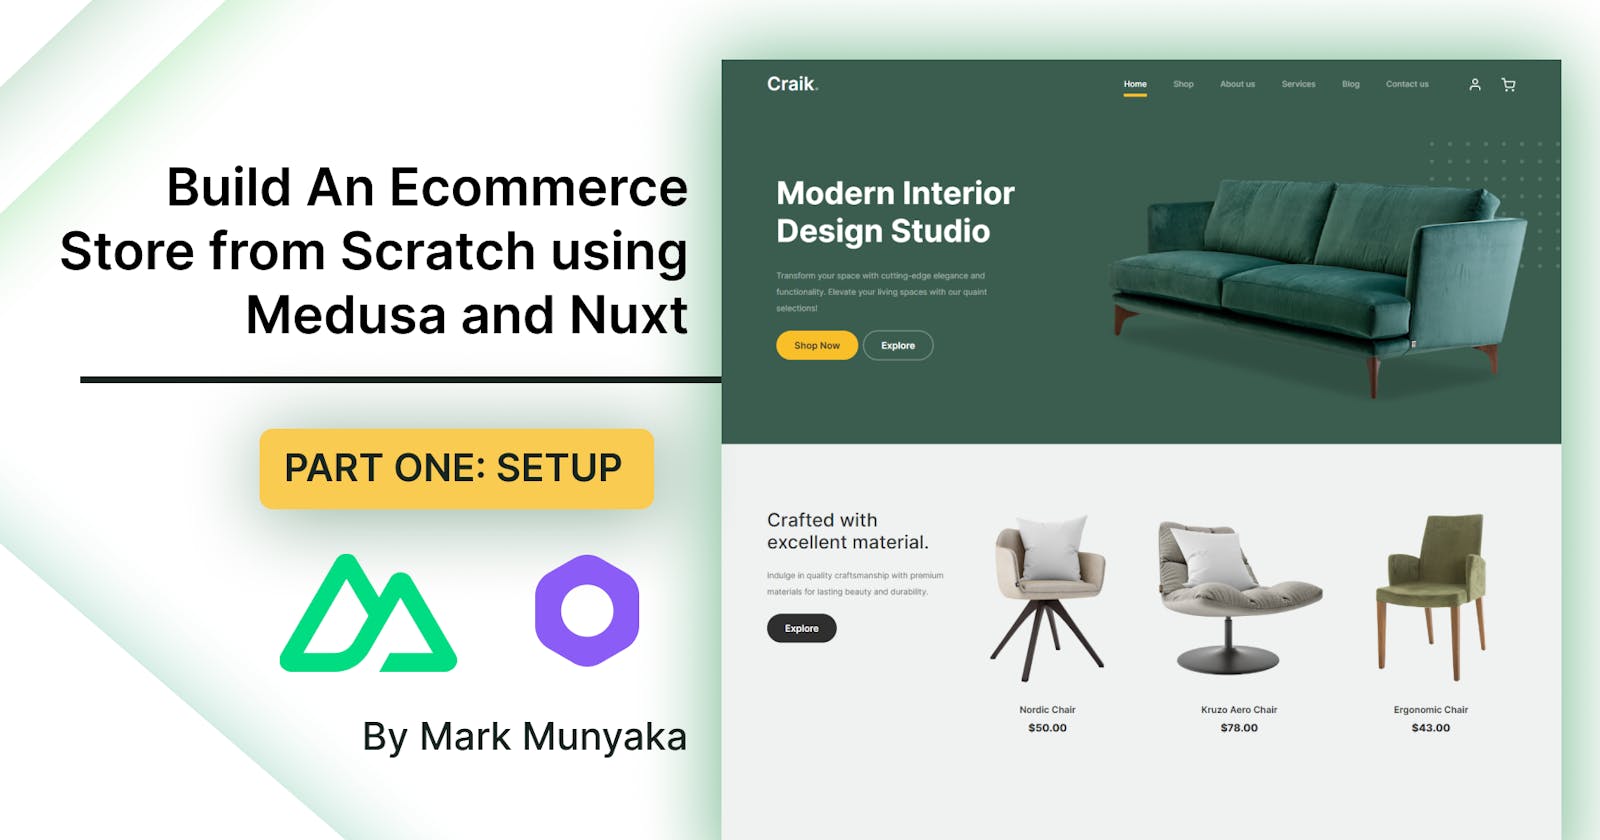 Build An Ecommerce Store from Scratch using Medusa and Nuxt: Part 01